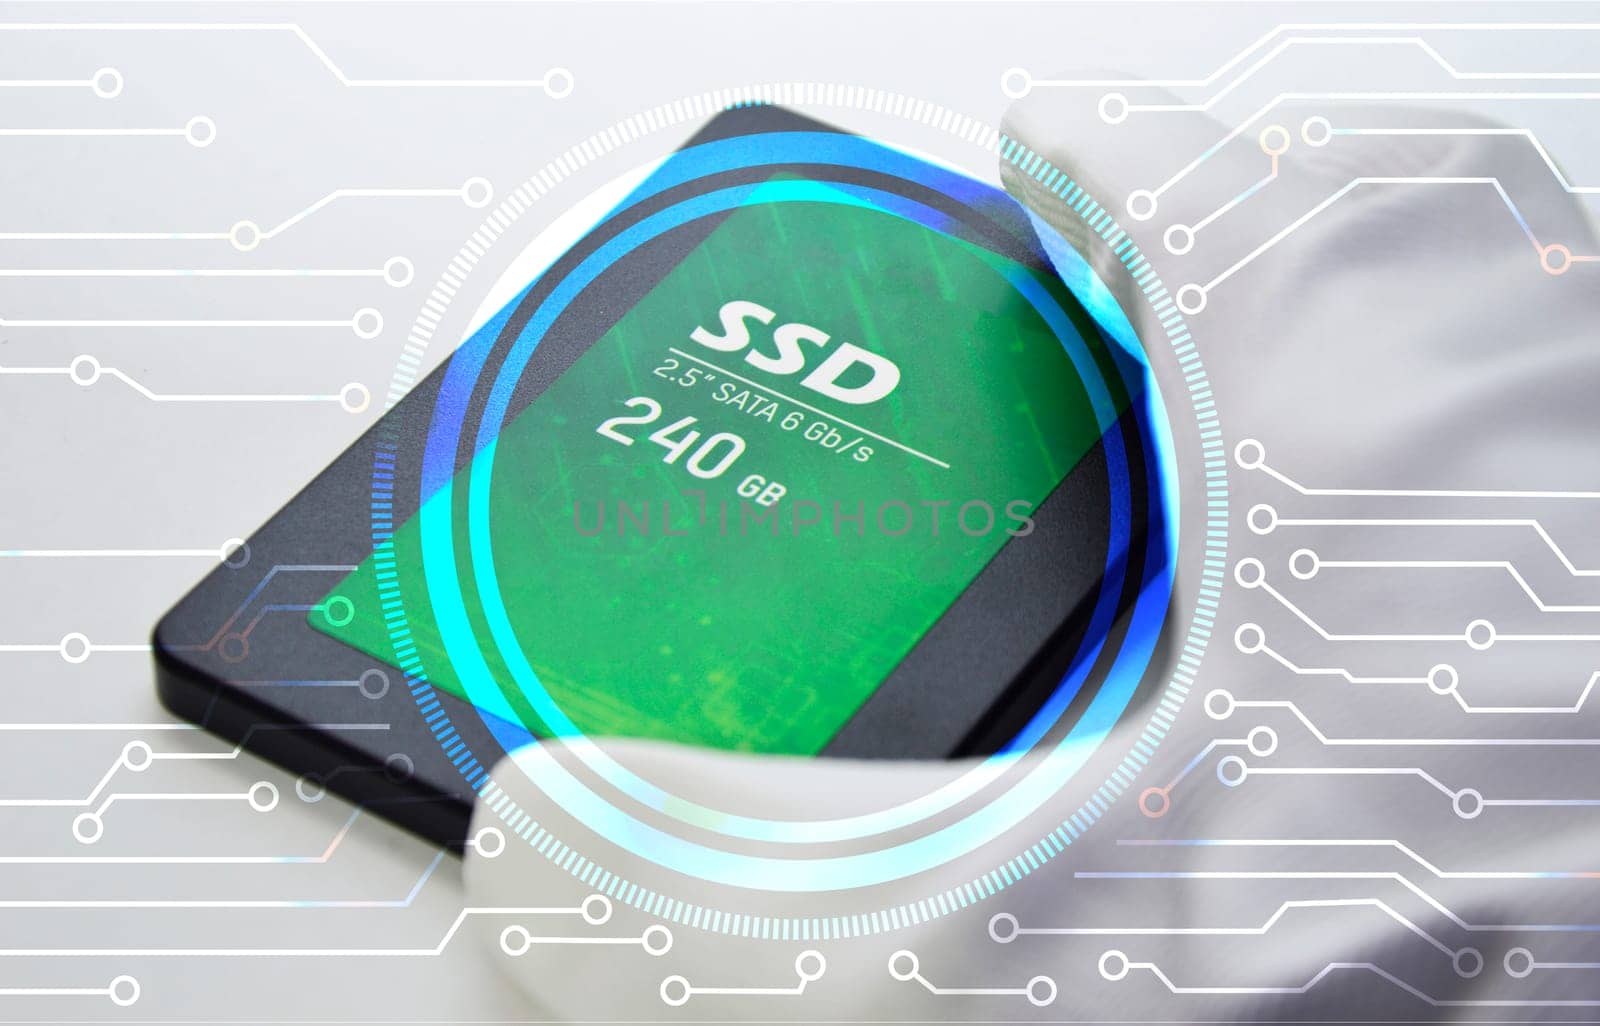 SSD hard drives are popular these days. because it works fast, ssd on a white background